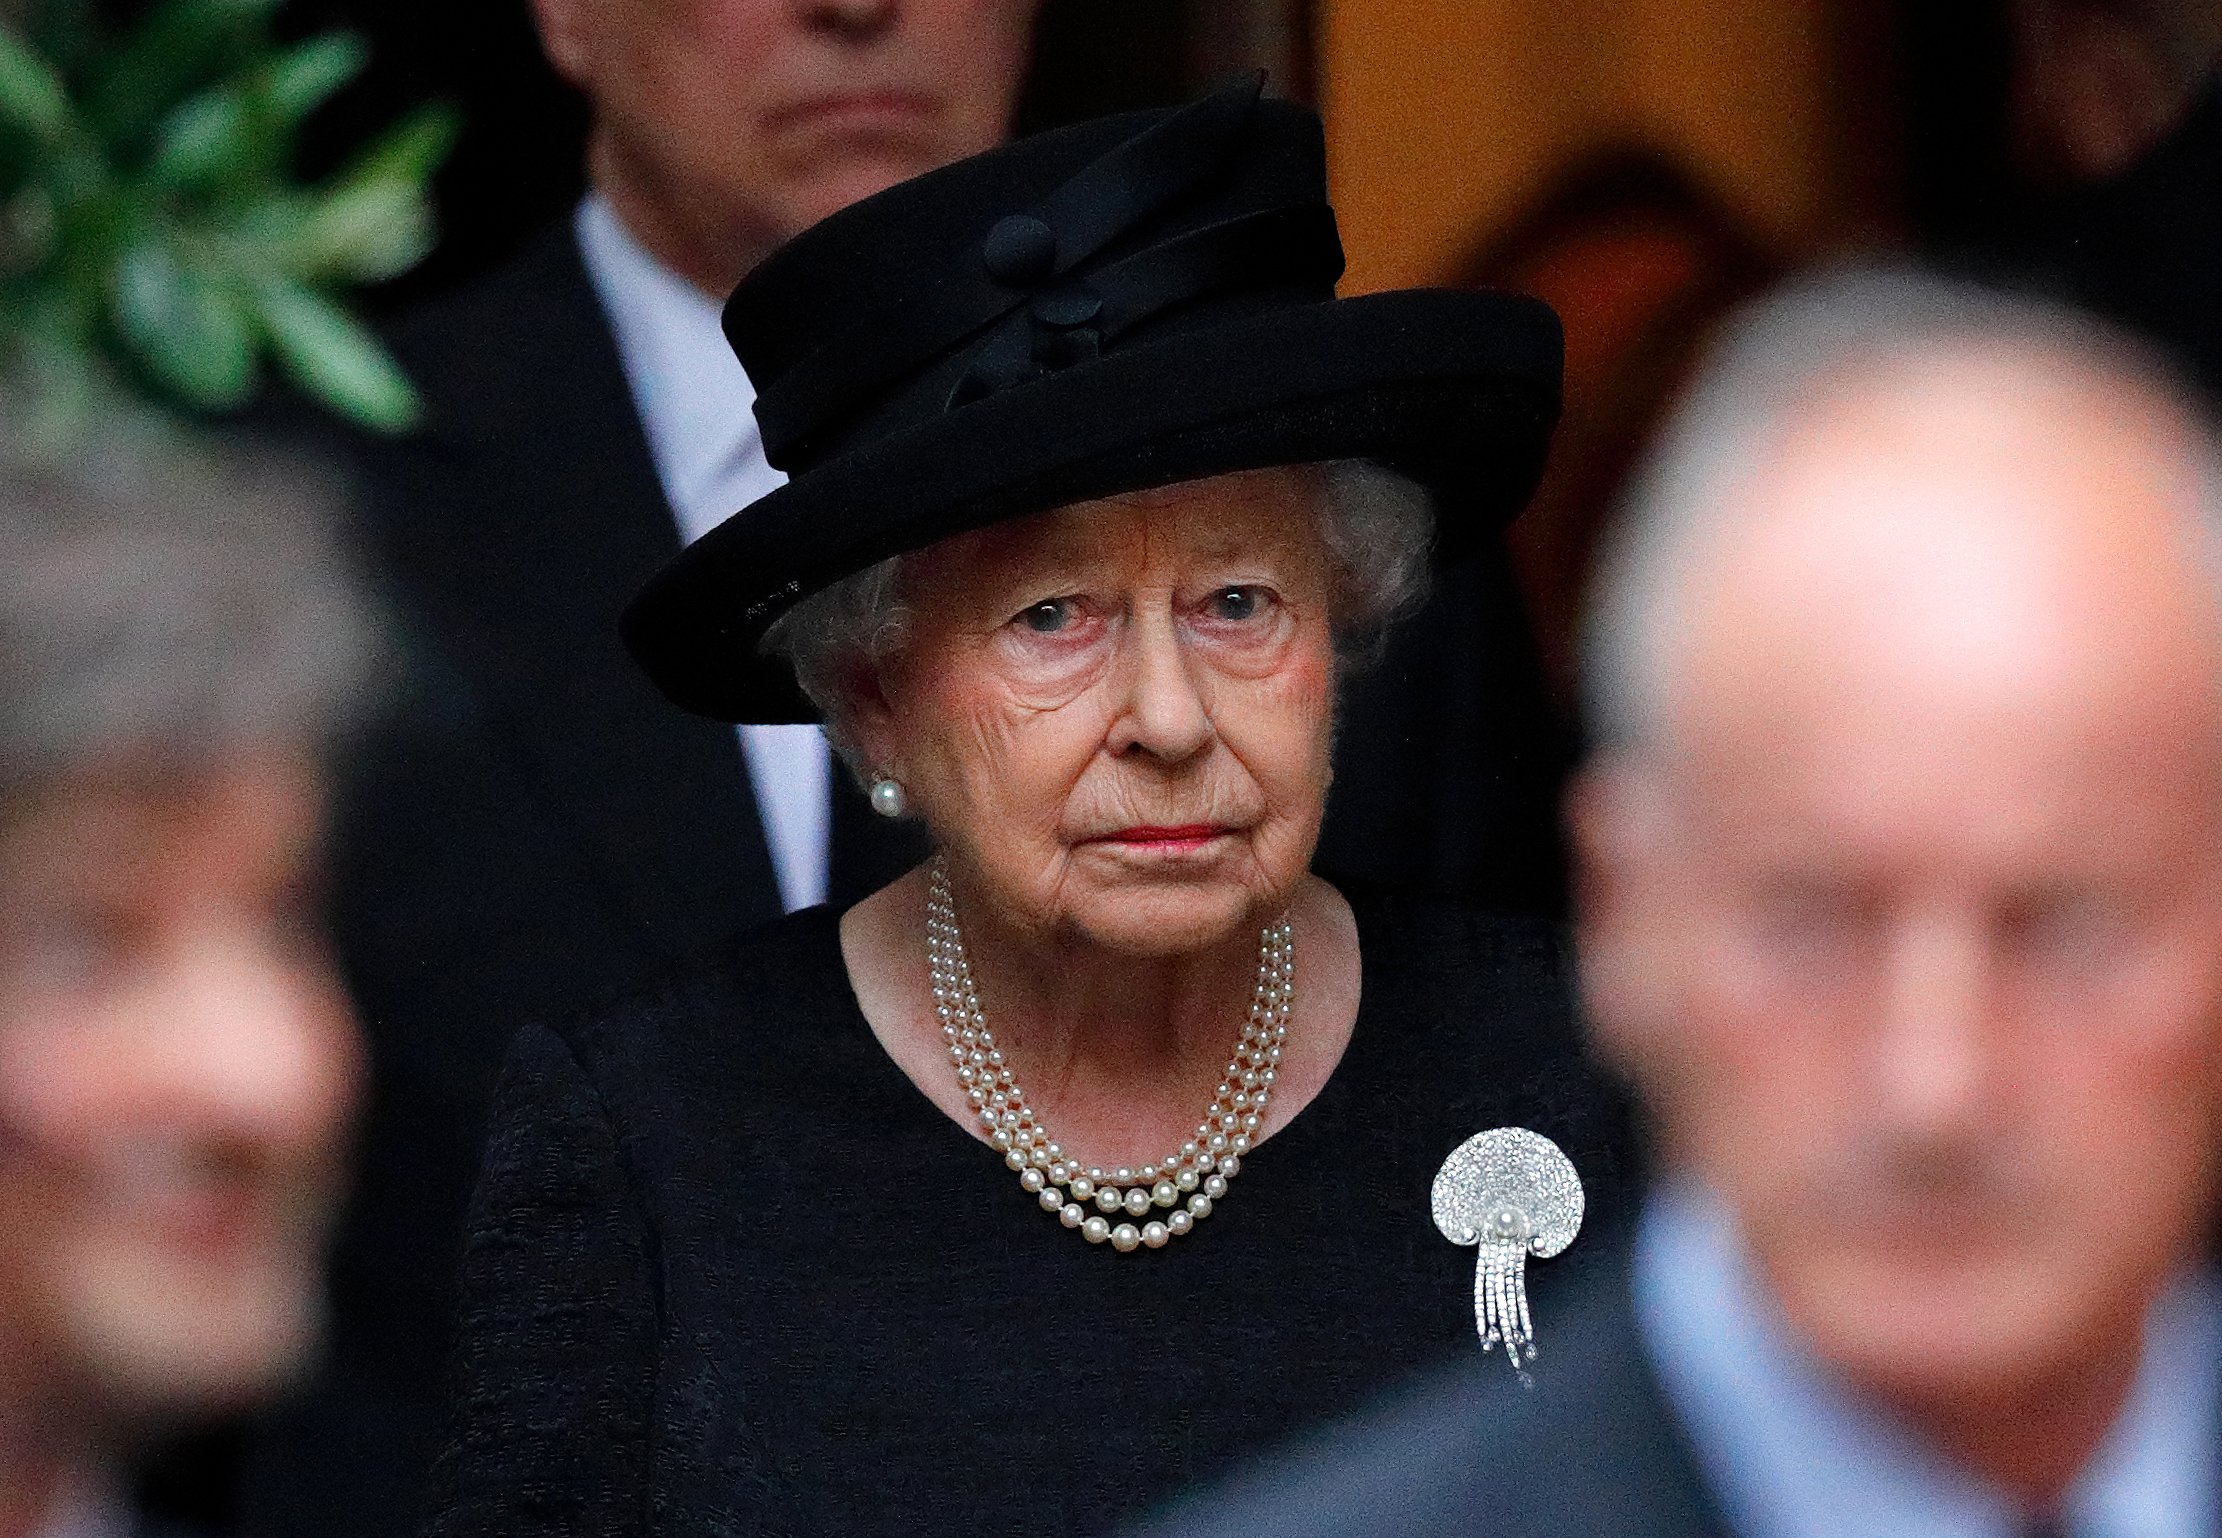 Queen Elizabeth II at the funeral of Patricia Knatchbull, Countess Mountbatten of Burma at St Paul's Church, Knightsbridge on June 27, 2017 in London, England  | Source: Getty Images